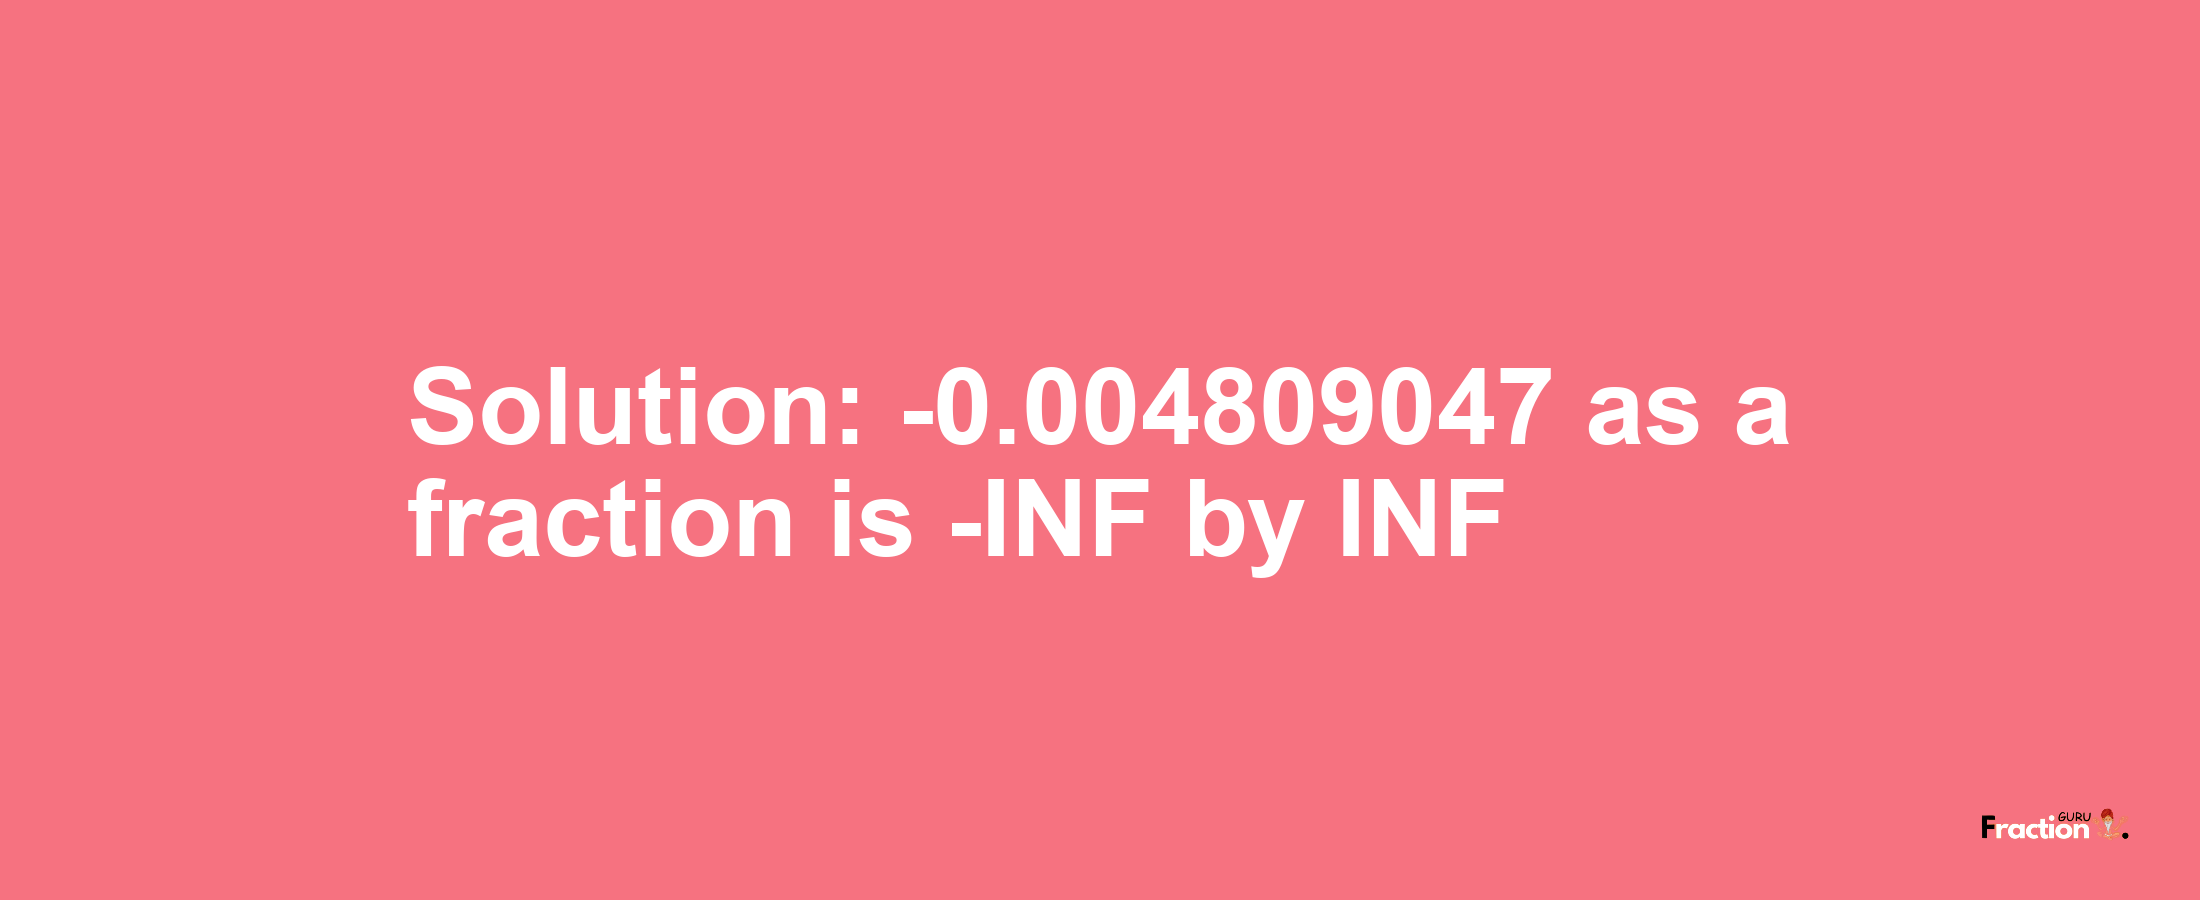 Solution:-0.004809047 as a fraction is -INF/INF